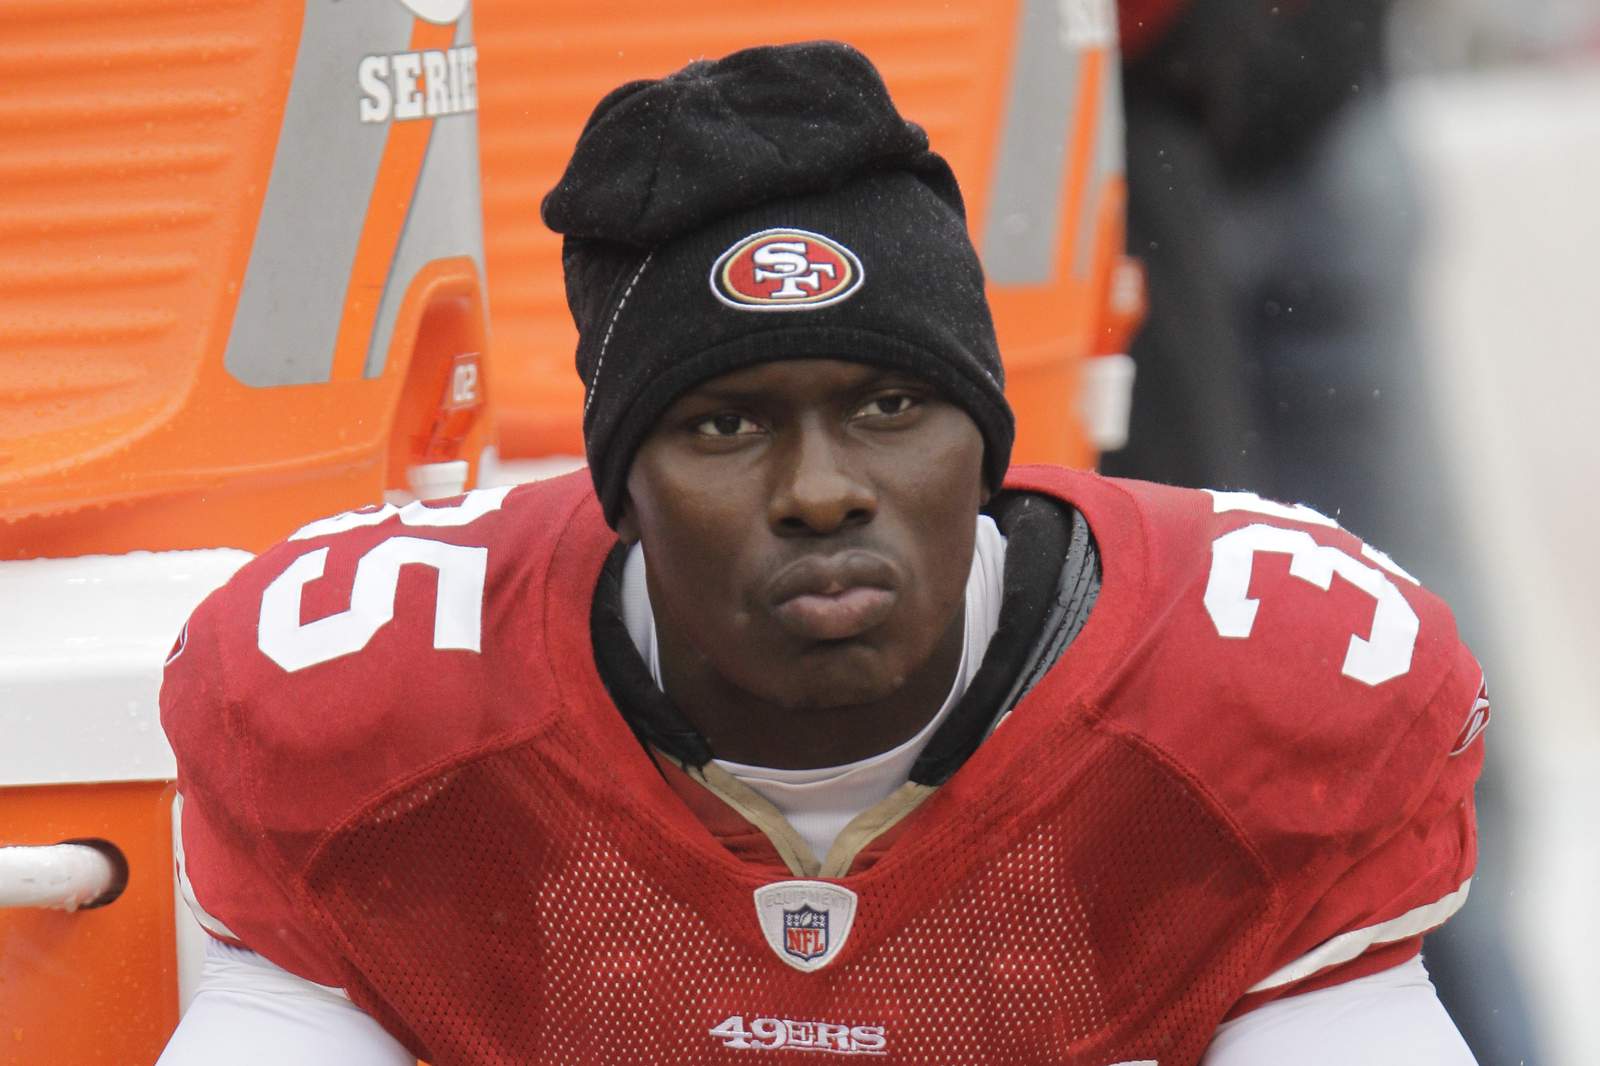 Report: Ex-NFL player's brain probed for trauma-related harm